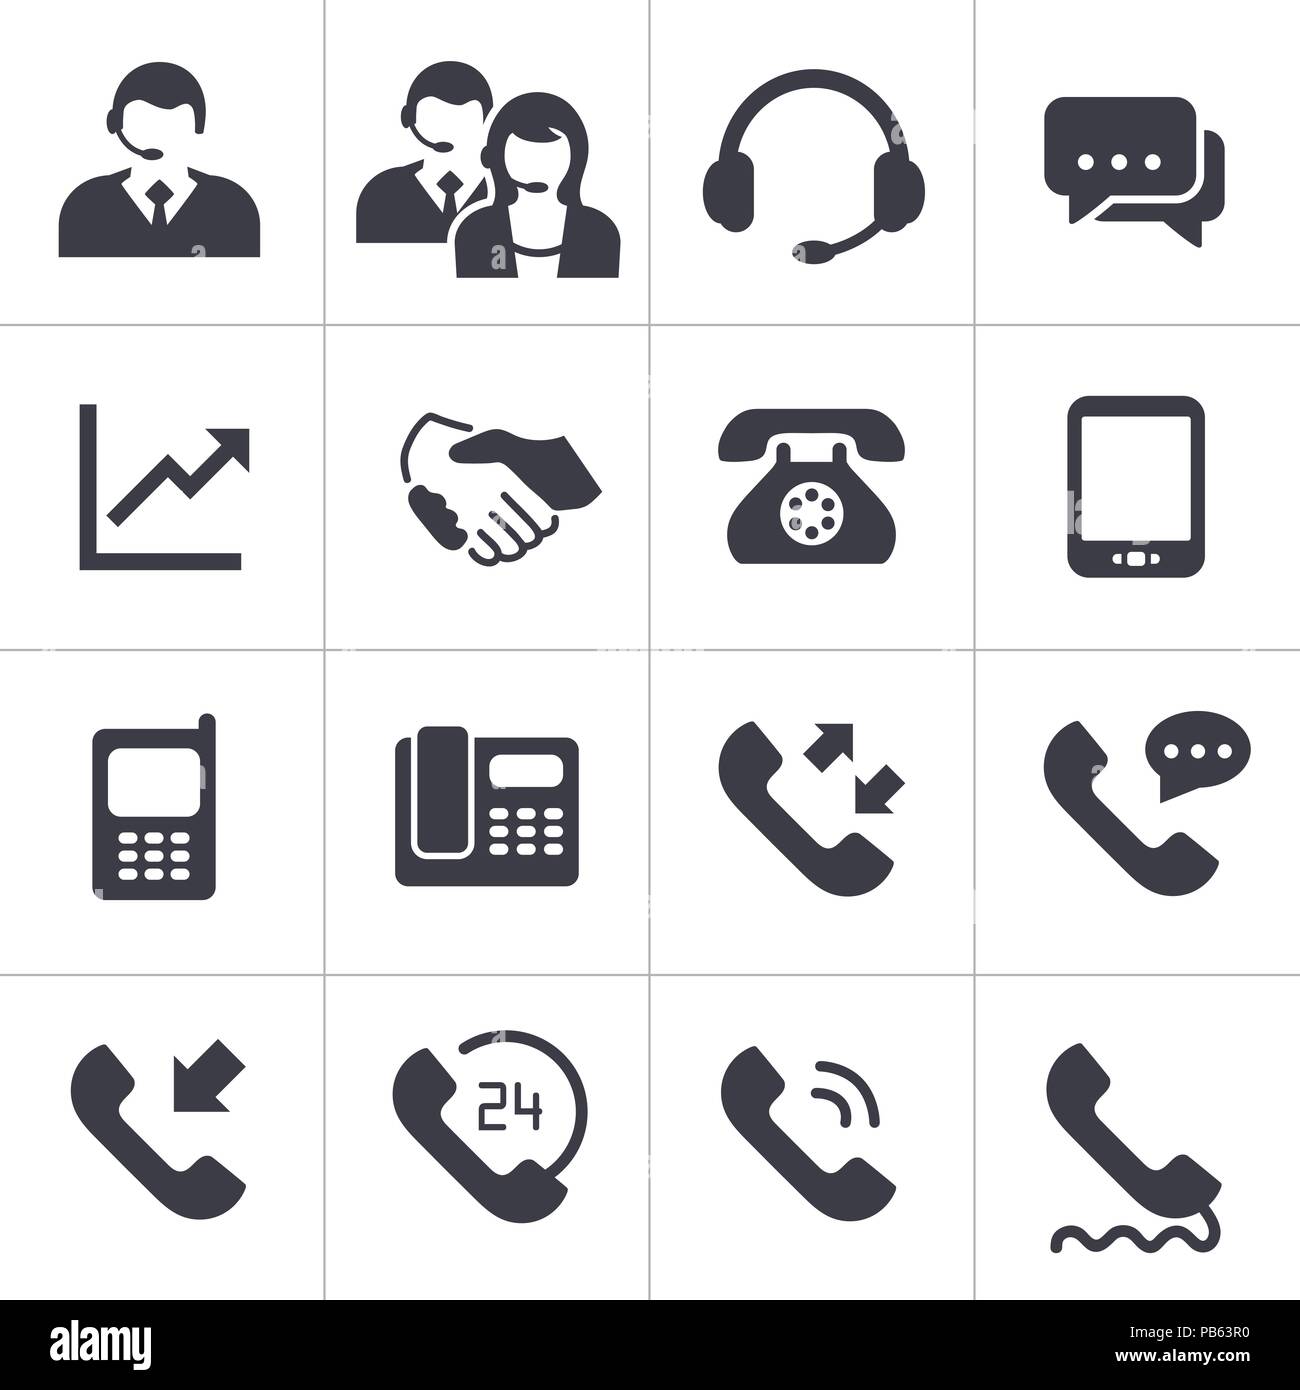 A Collection of Telephone Sales Icons - Vector Art Stock Vector